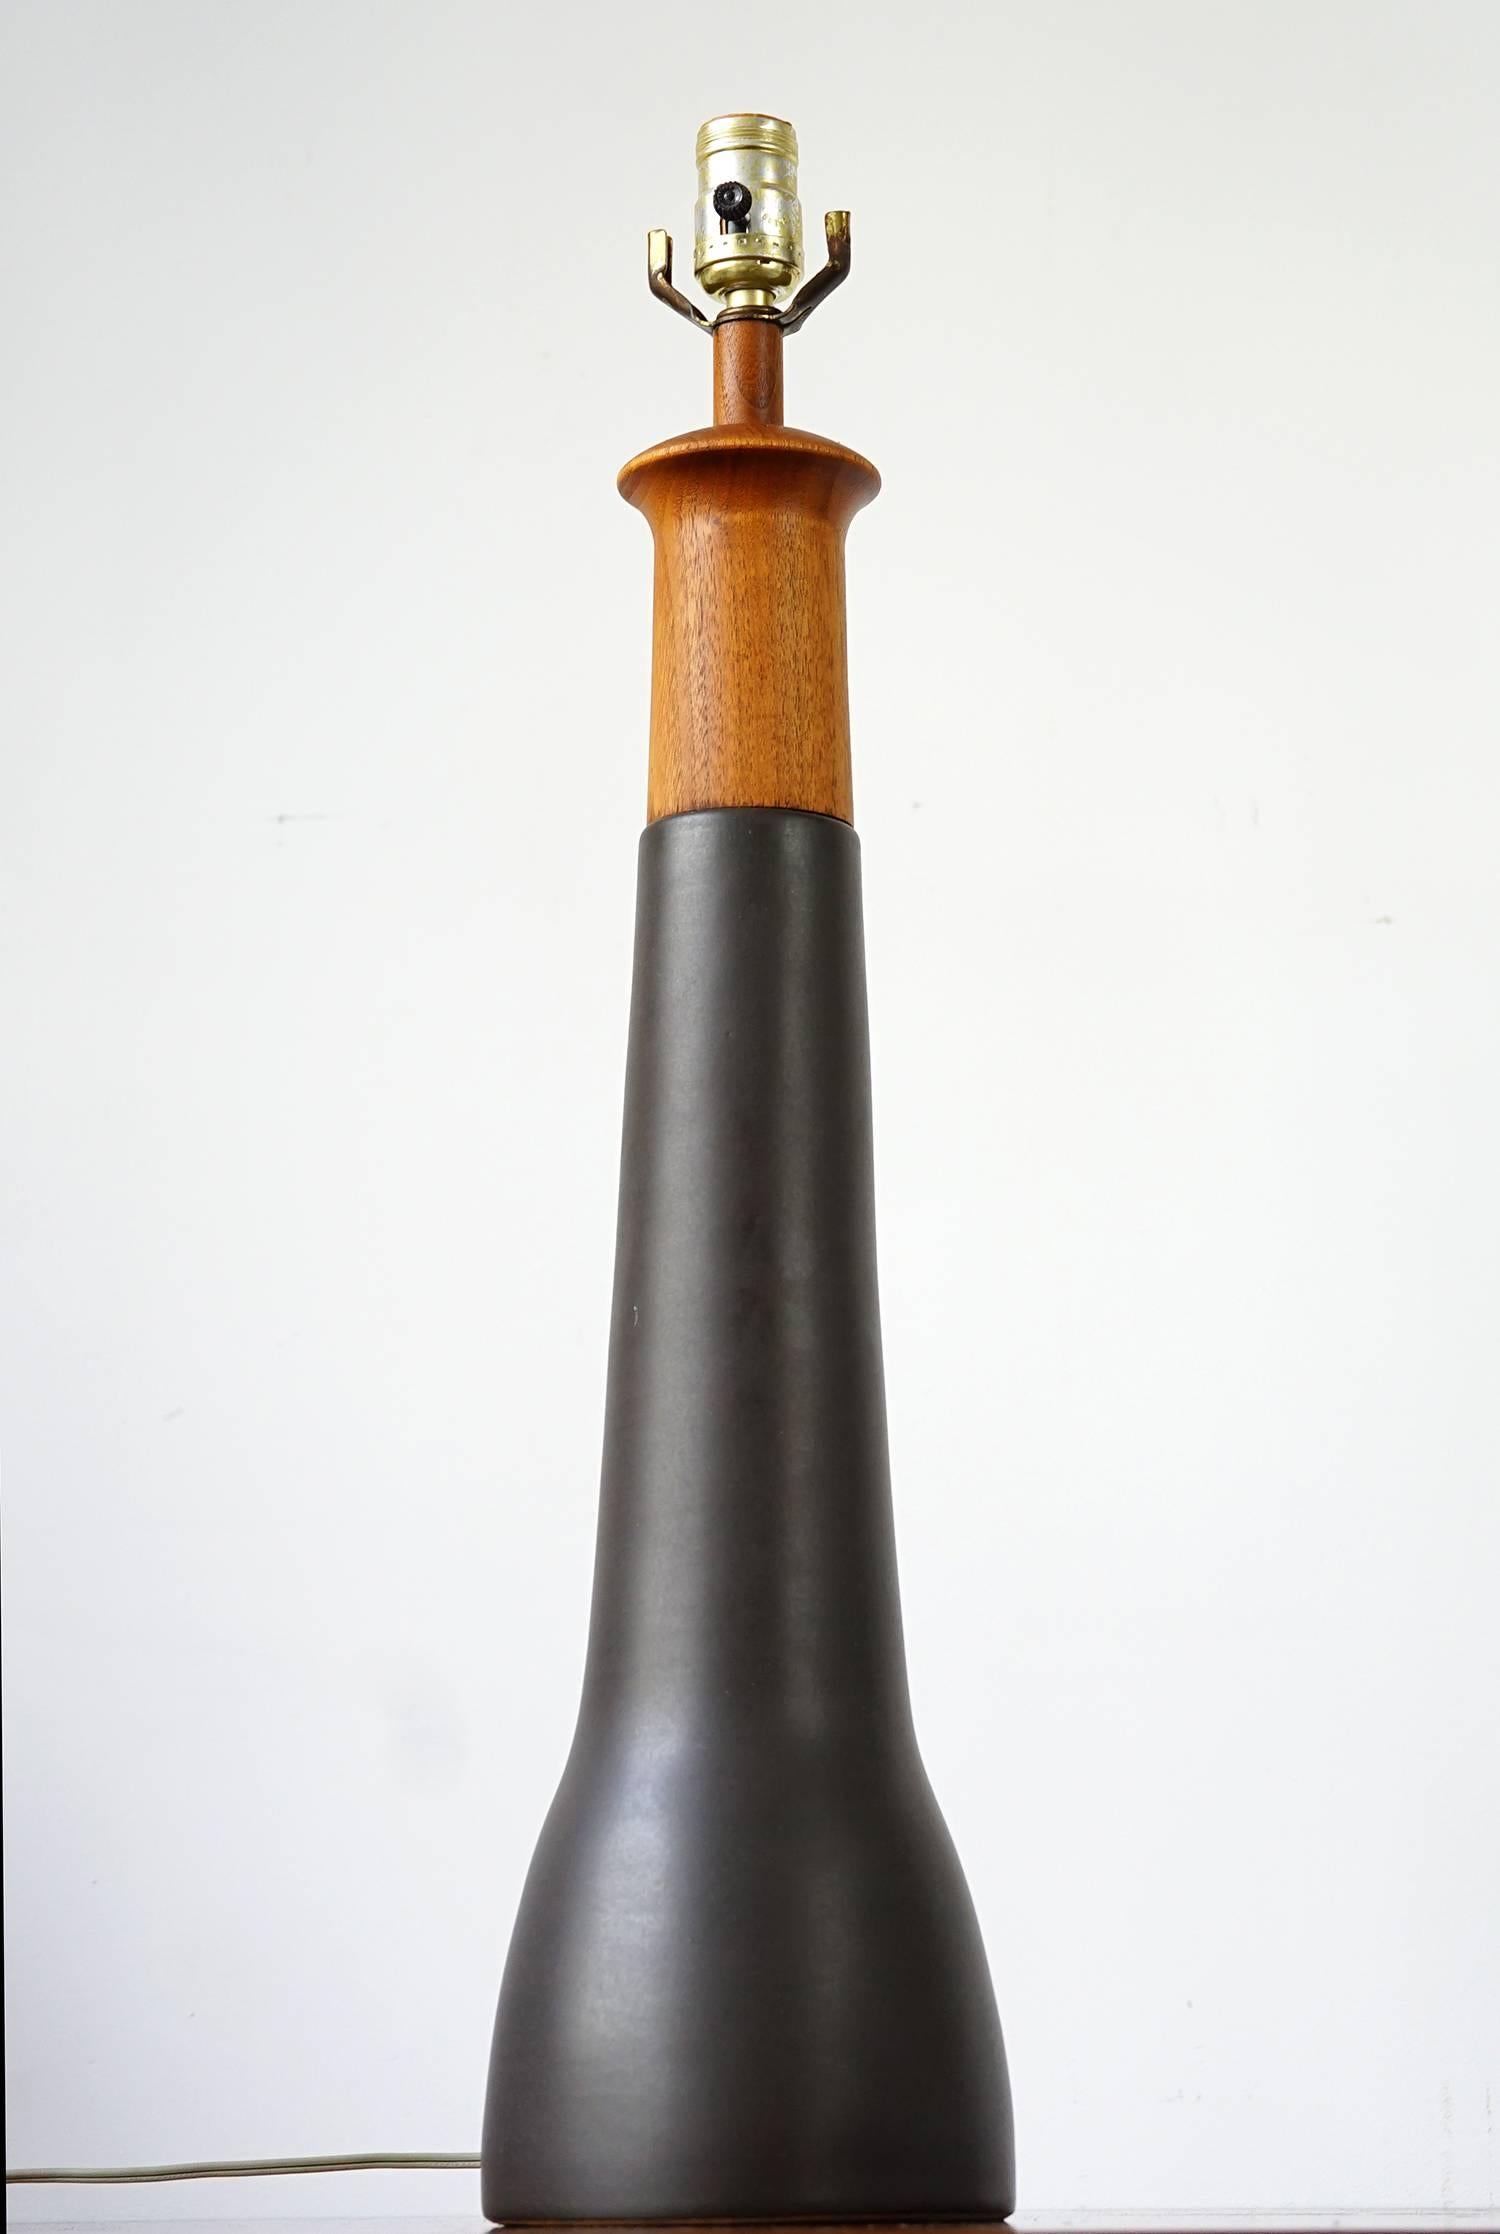 Tall, graceful form in graphite-toned ceramic with contrasting teak top. Original shade is in exceptional condition for its age with minor signs of wear. Original cylindrical, teak finial. Signed. A handsome example.

Overall Dimensions including